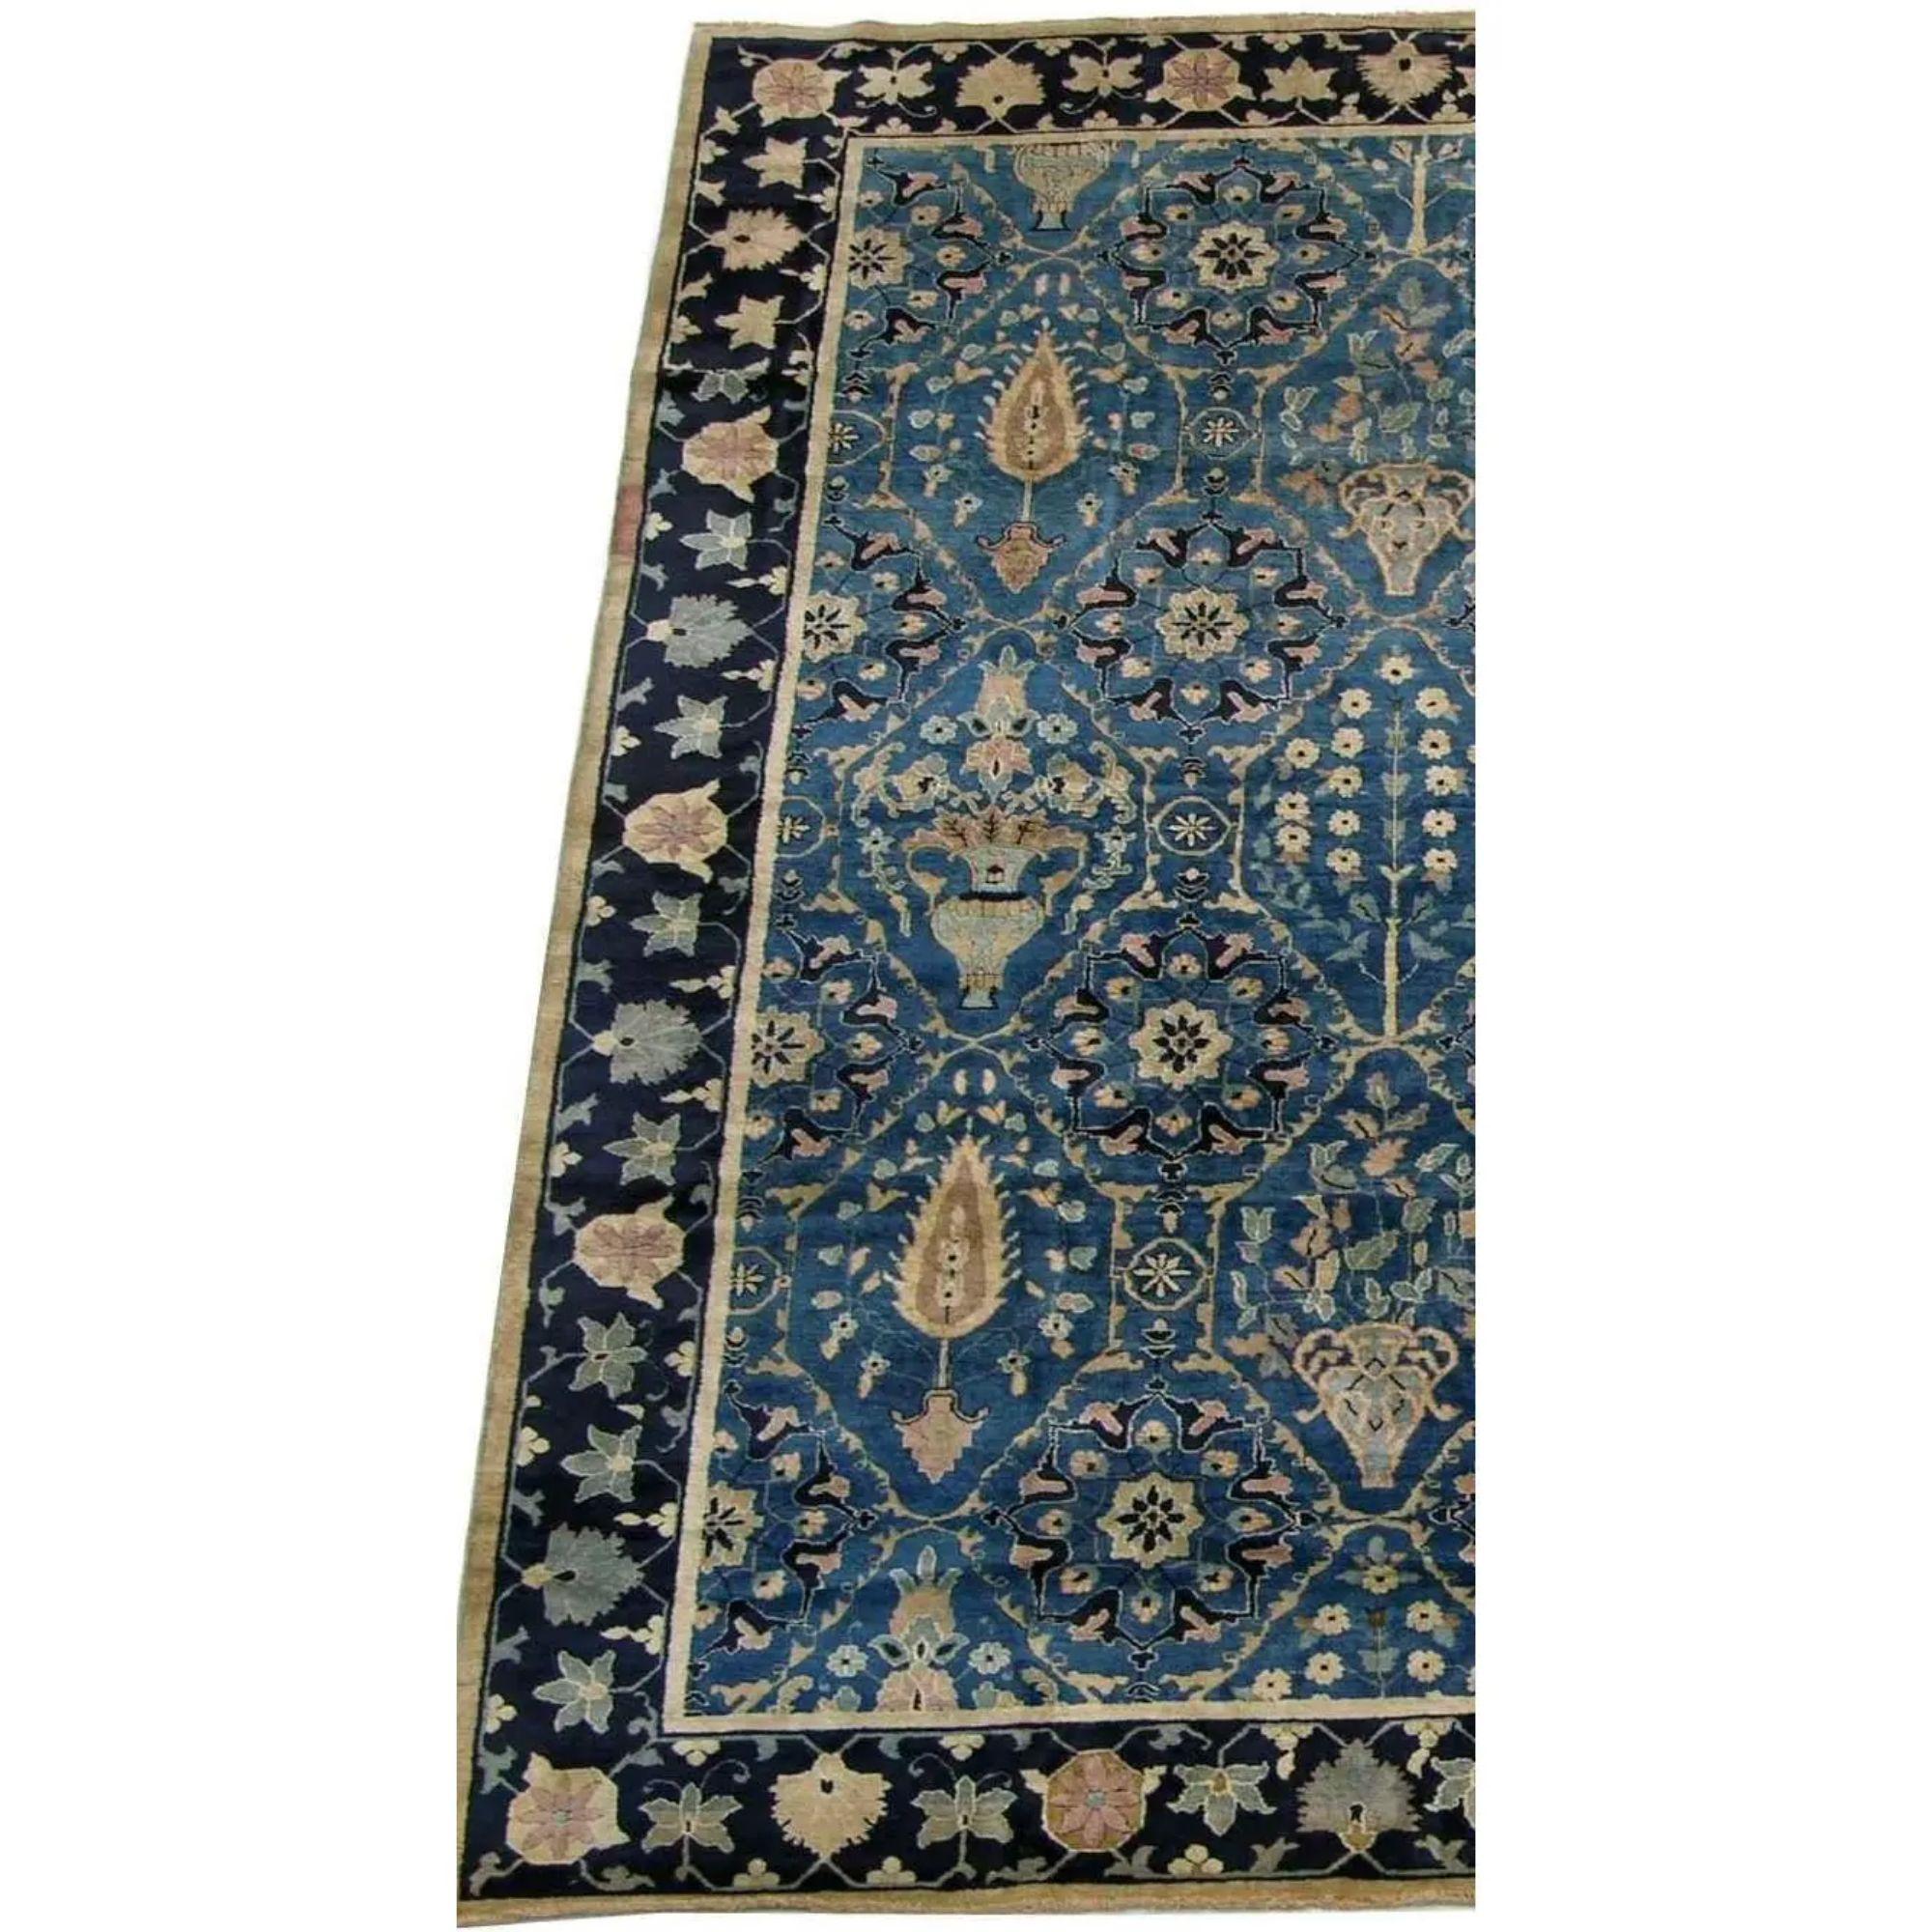 Chinese Export 1990s Vintage Decorative Chinese Rug with Floral Design 10′2″ × 11′2″ For Sale